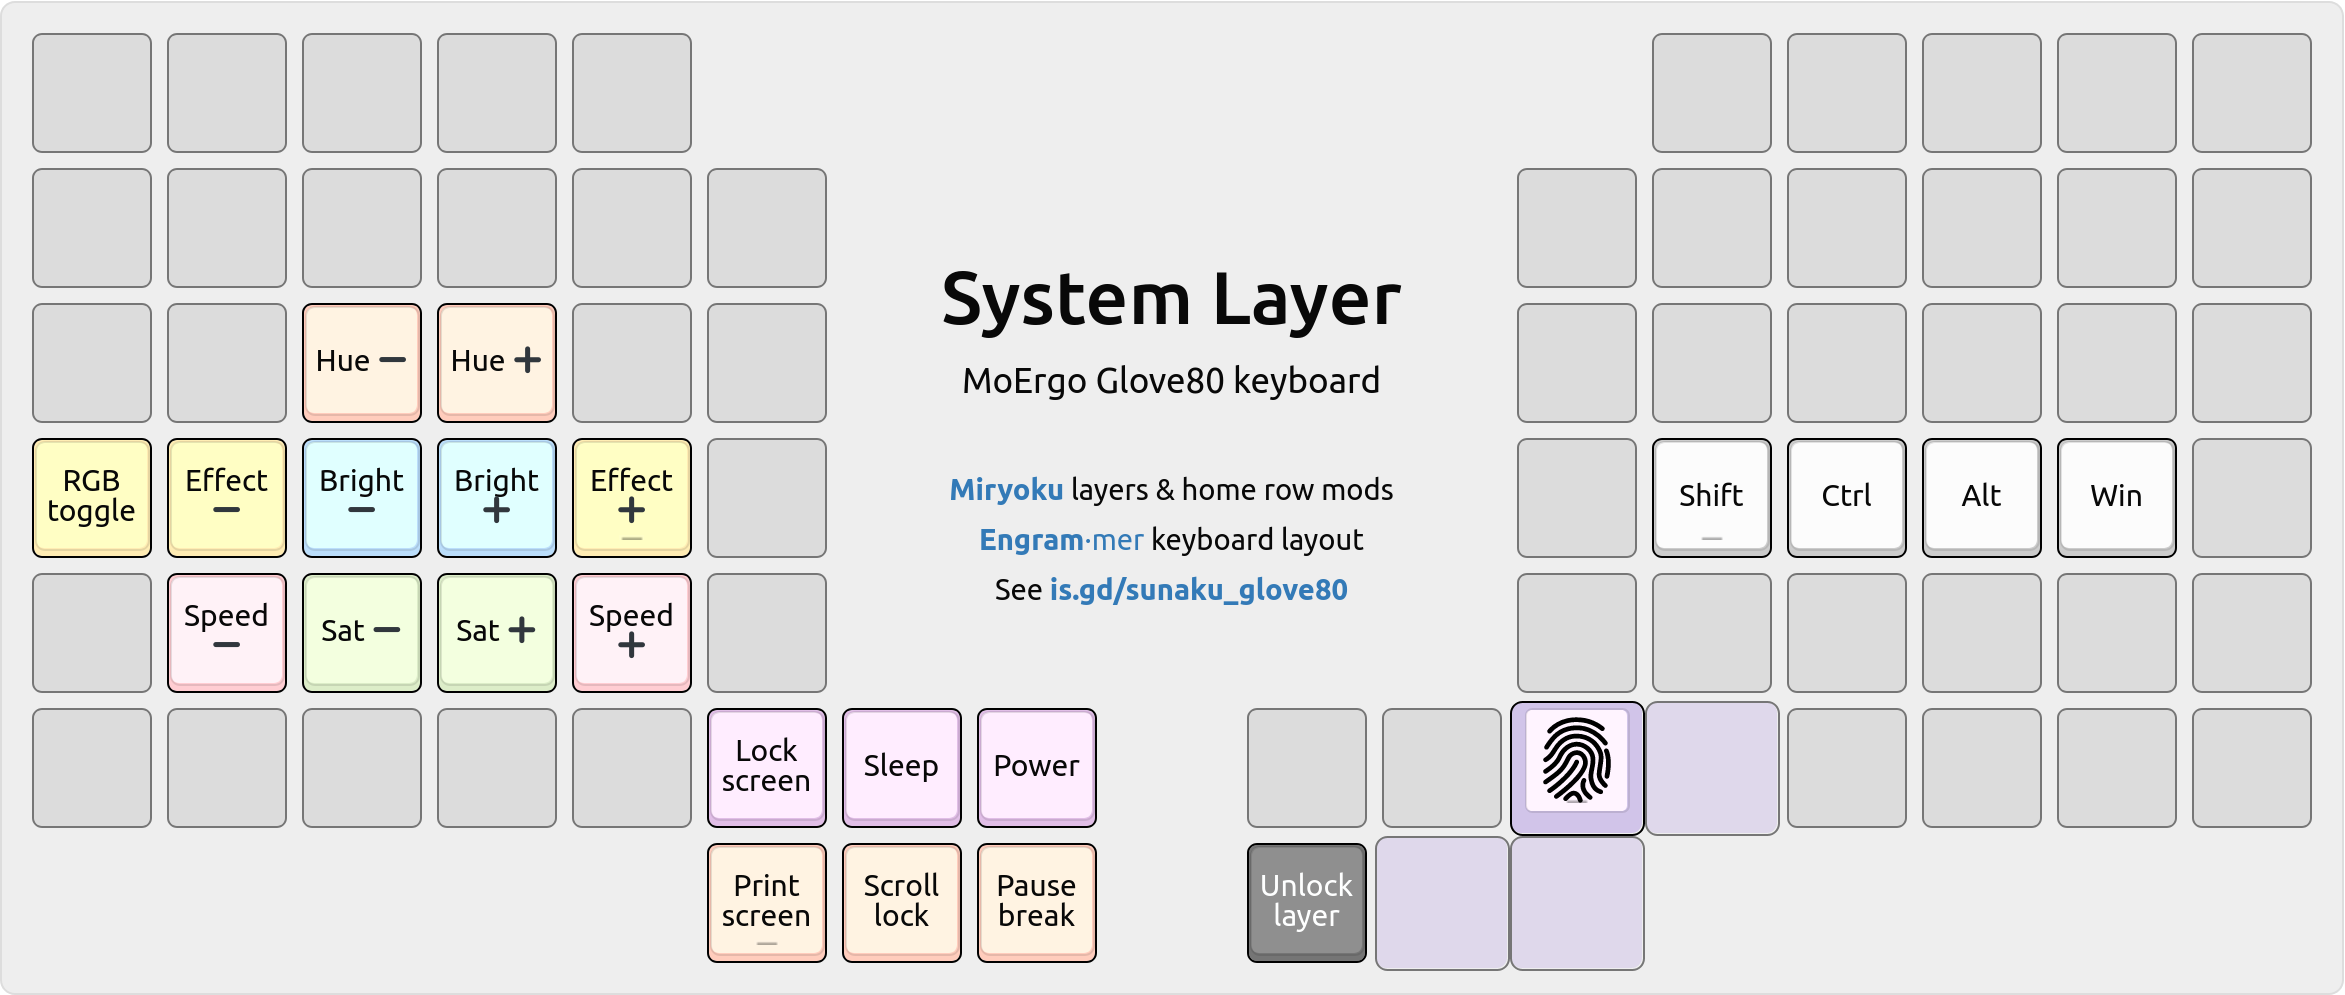 System layer